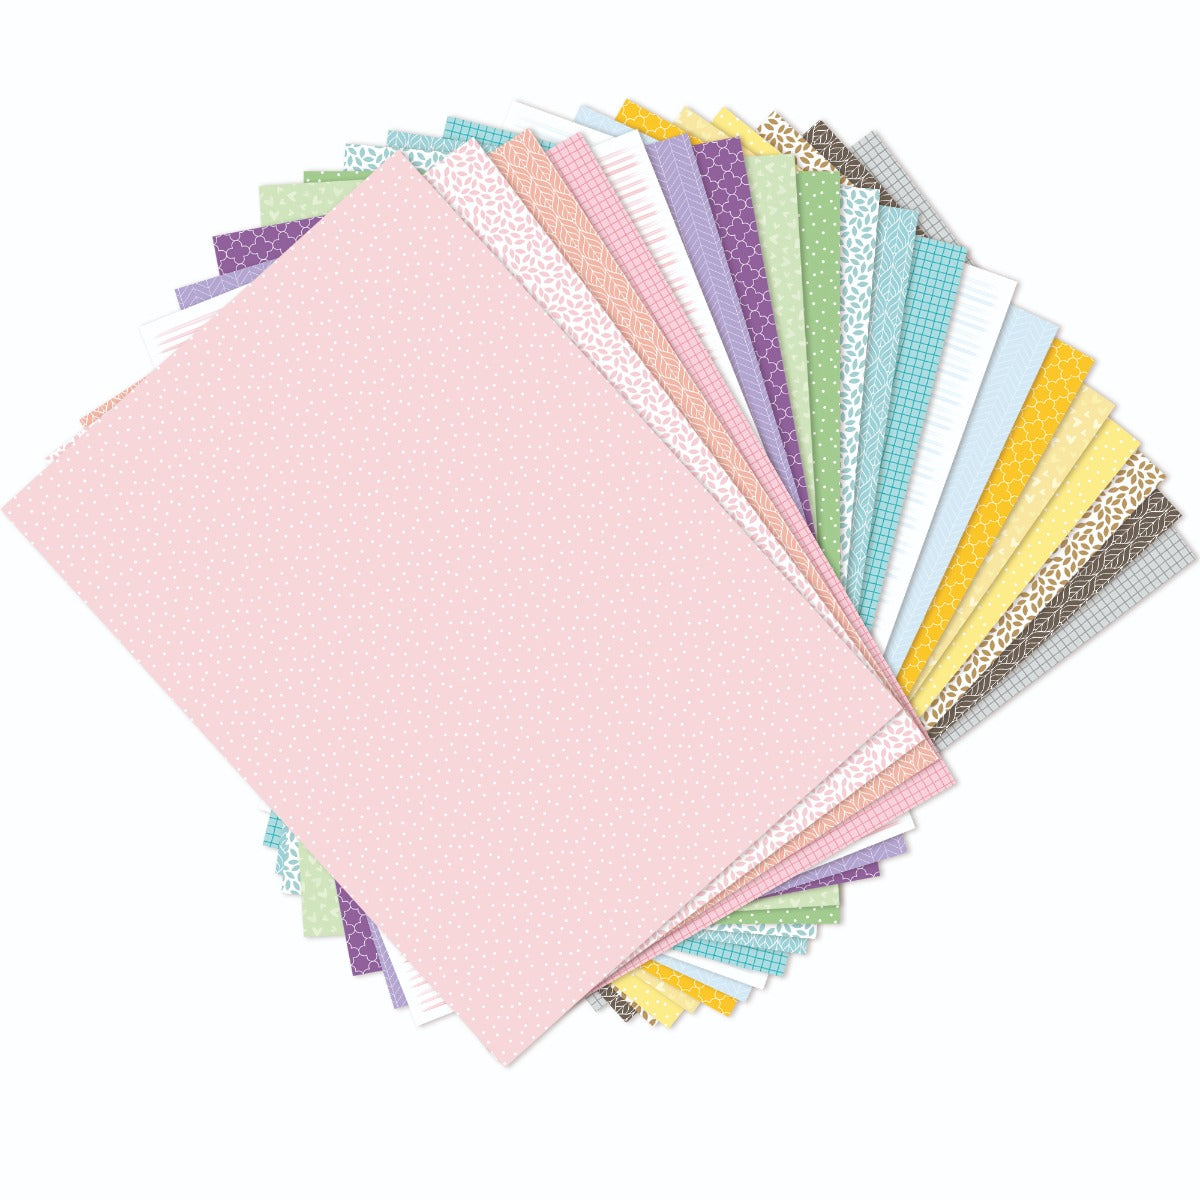 sizzix-surfacez-patterned-paper-color-story-80-sheets